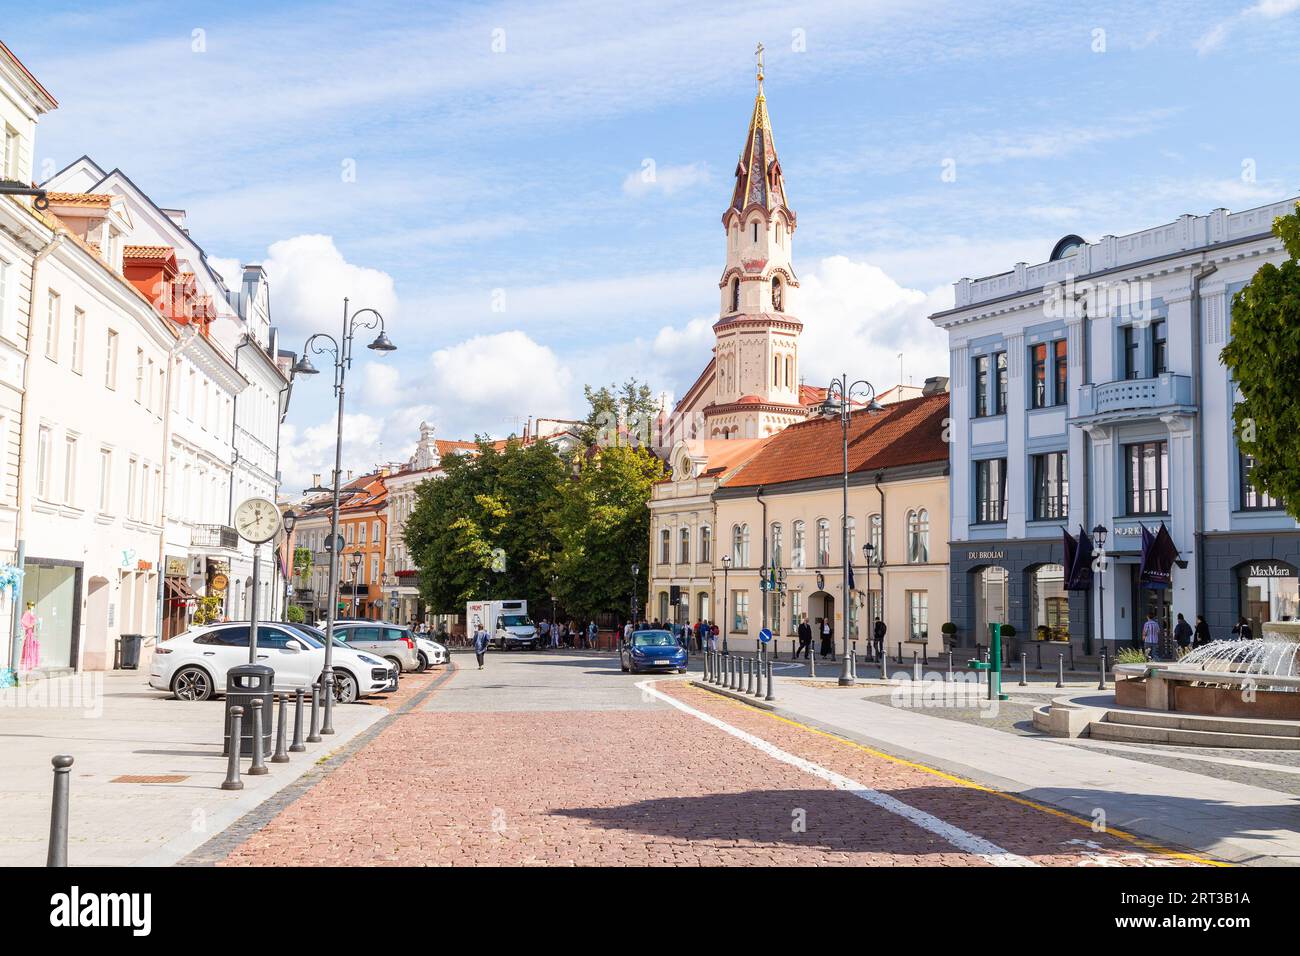 VILNIUS, LITHUANIA - 1ST SEPT 2023: Streets in Vilnius Old Town. Showing architecture and a church tower. People can be seen outside. Stock Photo